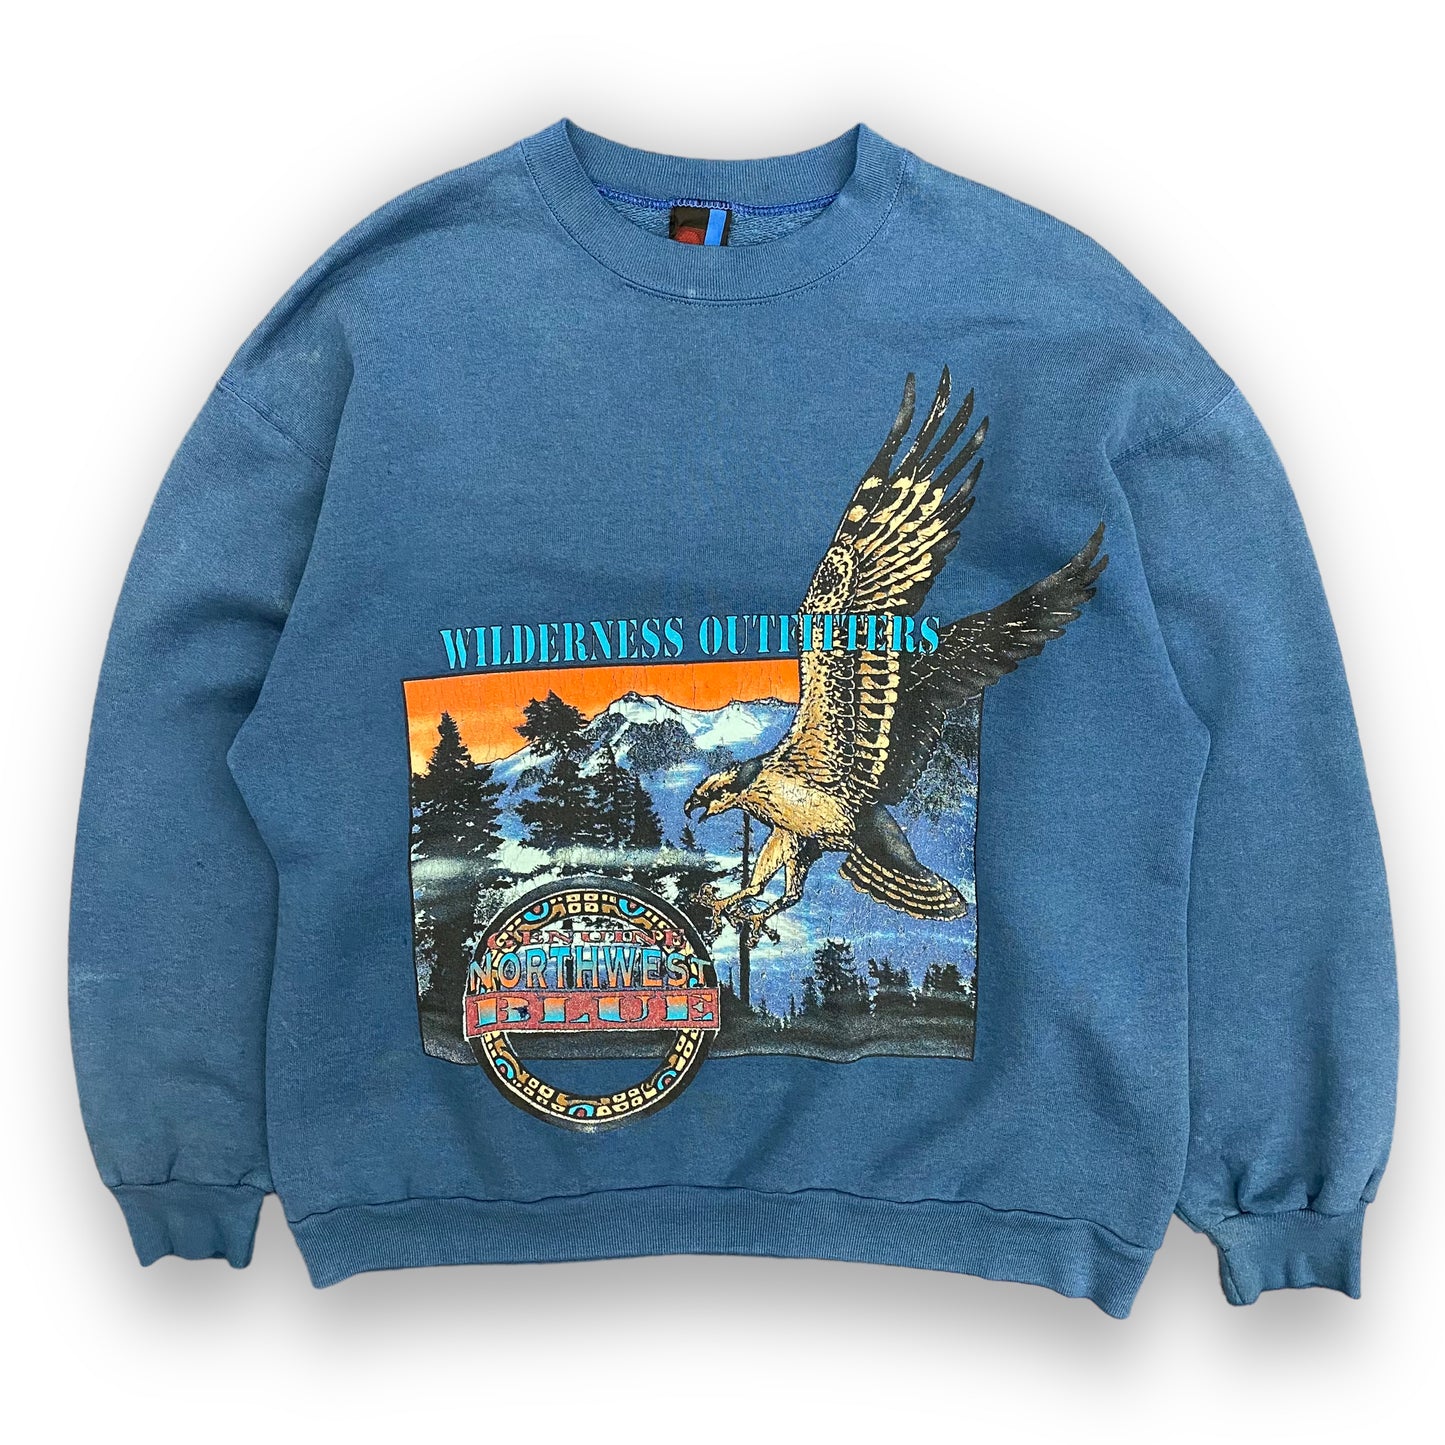 Vintage 1990s Wilderness Outfitters "Northwest Blue" Crewneck - Size Large